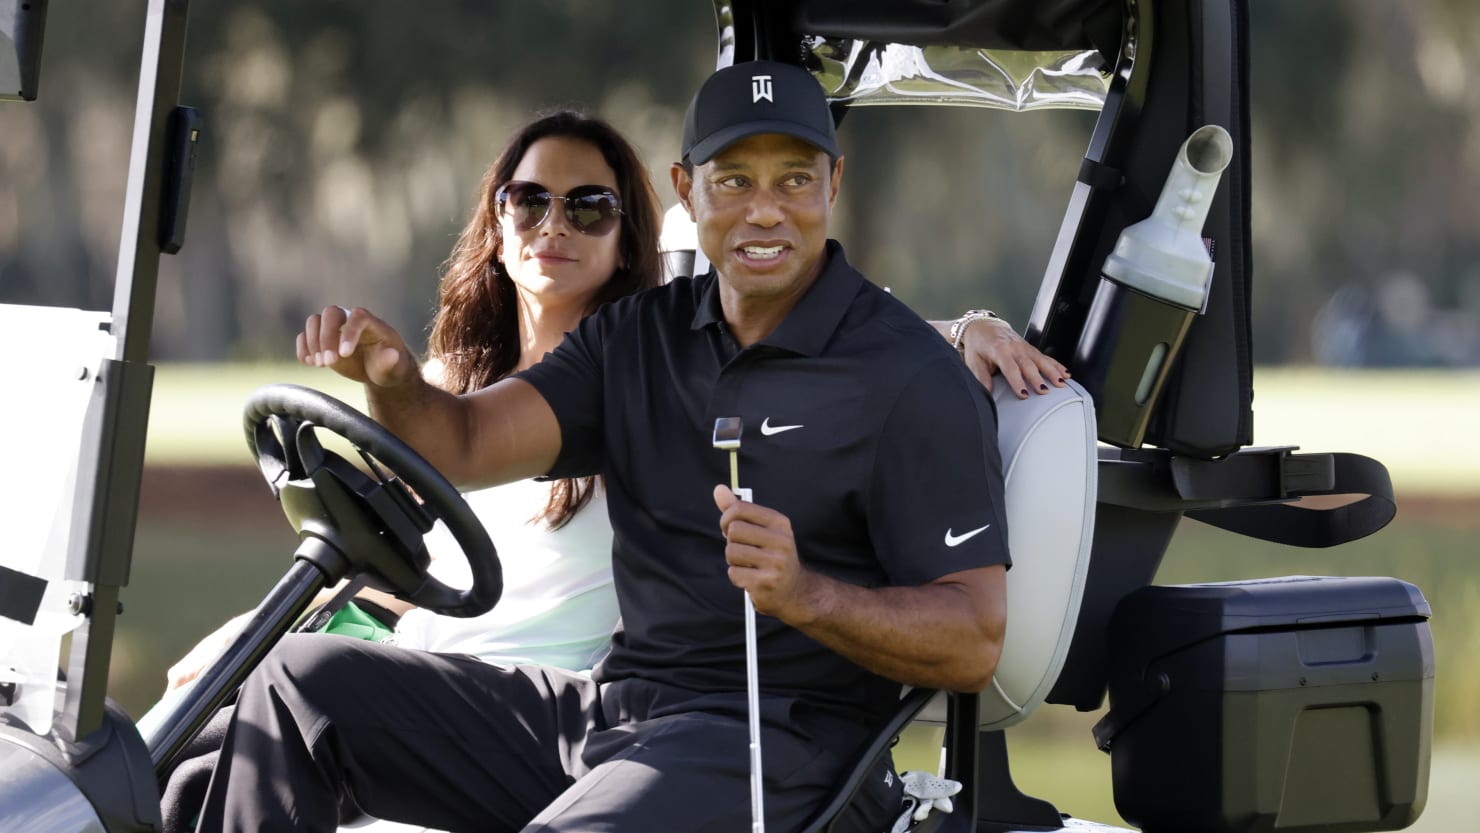 Tiger Woods Ex Goes to Court to Have Her NDA Scrapped